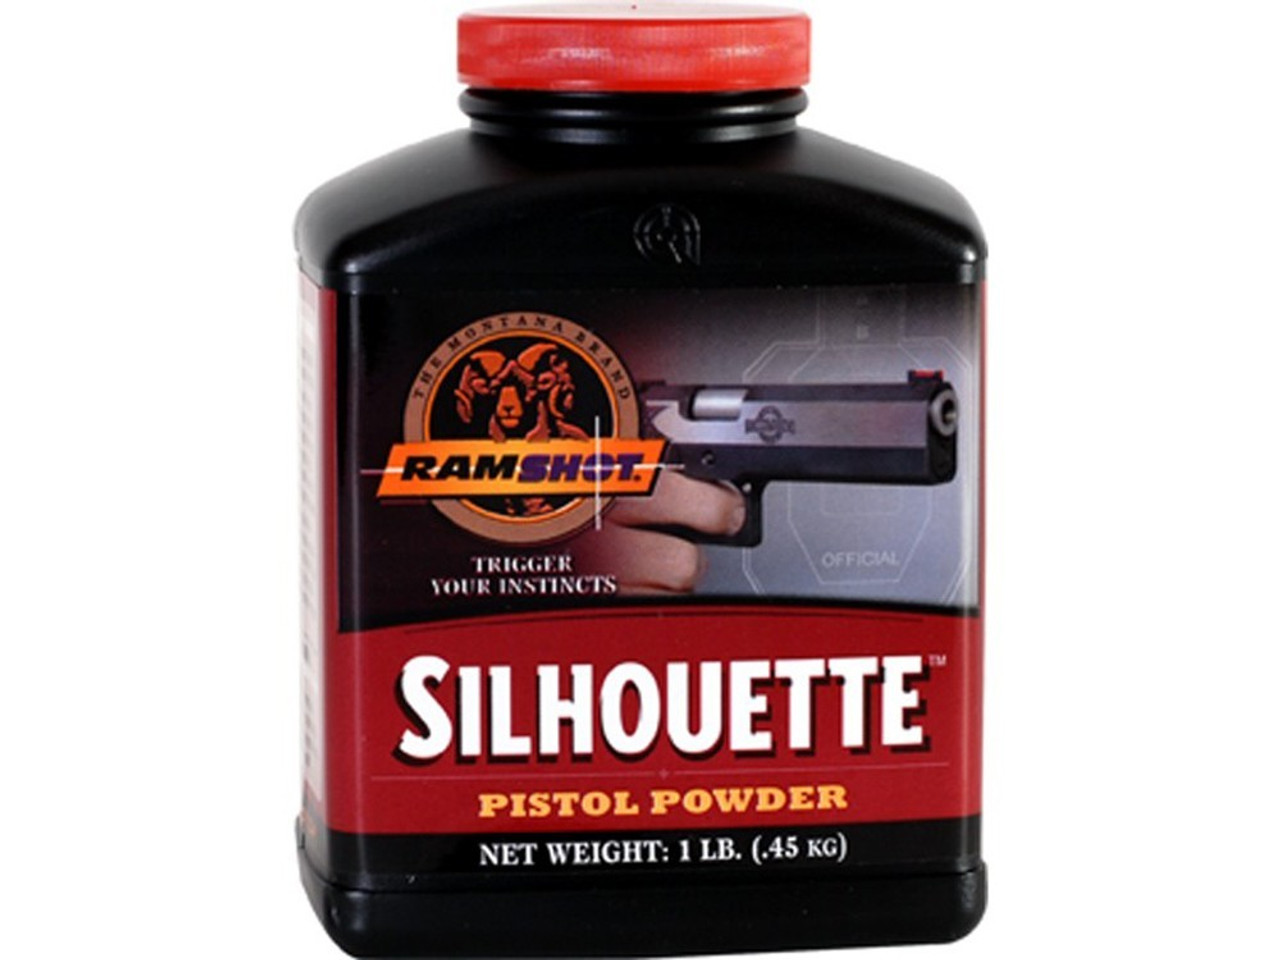 Silhouette is a double based, modified (flattened) spherical powder that performs well in medium sized handgun cases. Silhouette’s low flash signature, high velocity, and clean burning properties make it a perfect choice for indoor ranges and law enforcement applications.